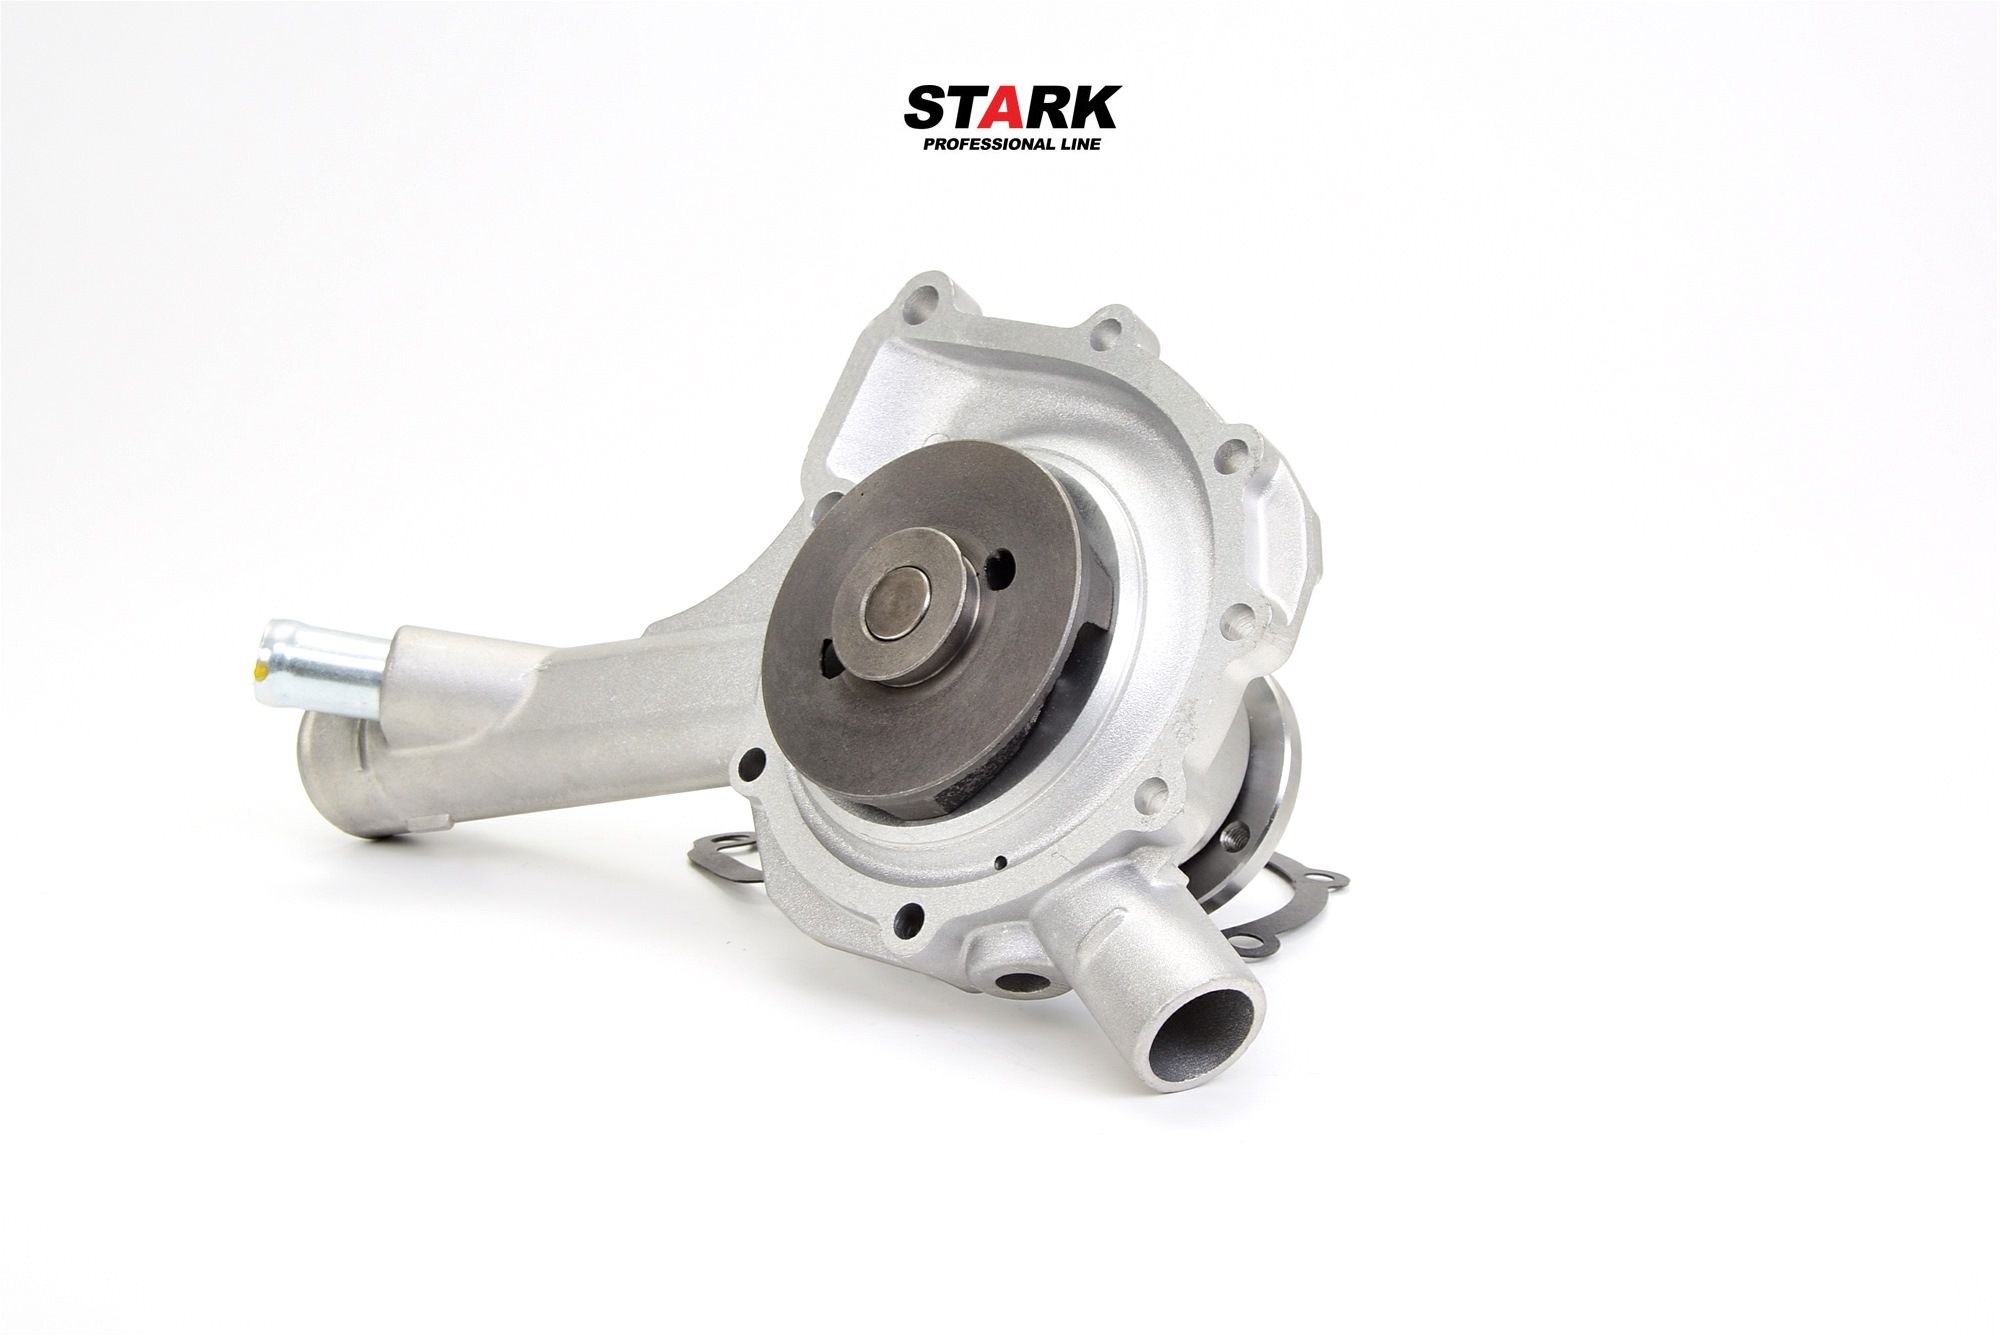 STARK SKWP-0520009 Water pump Cast Aluminium, without belt pulley, with seal, with flange, Mechanical, Metal impeller